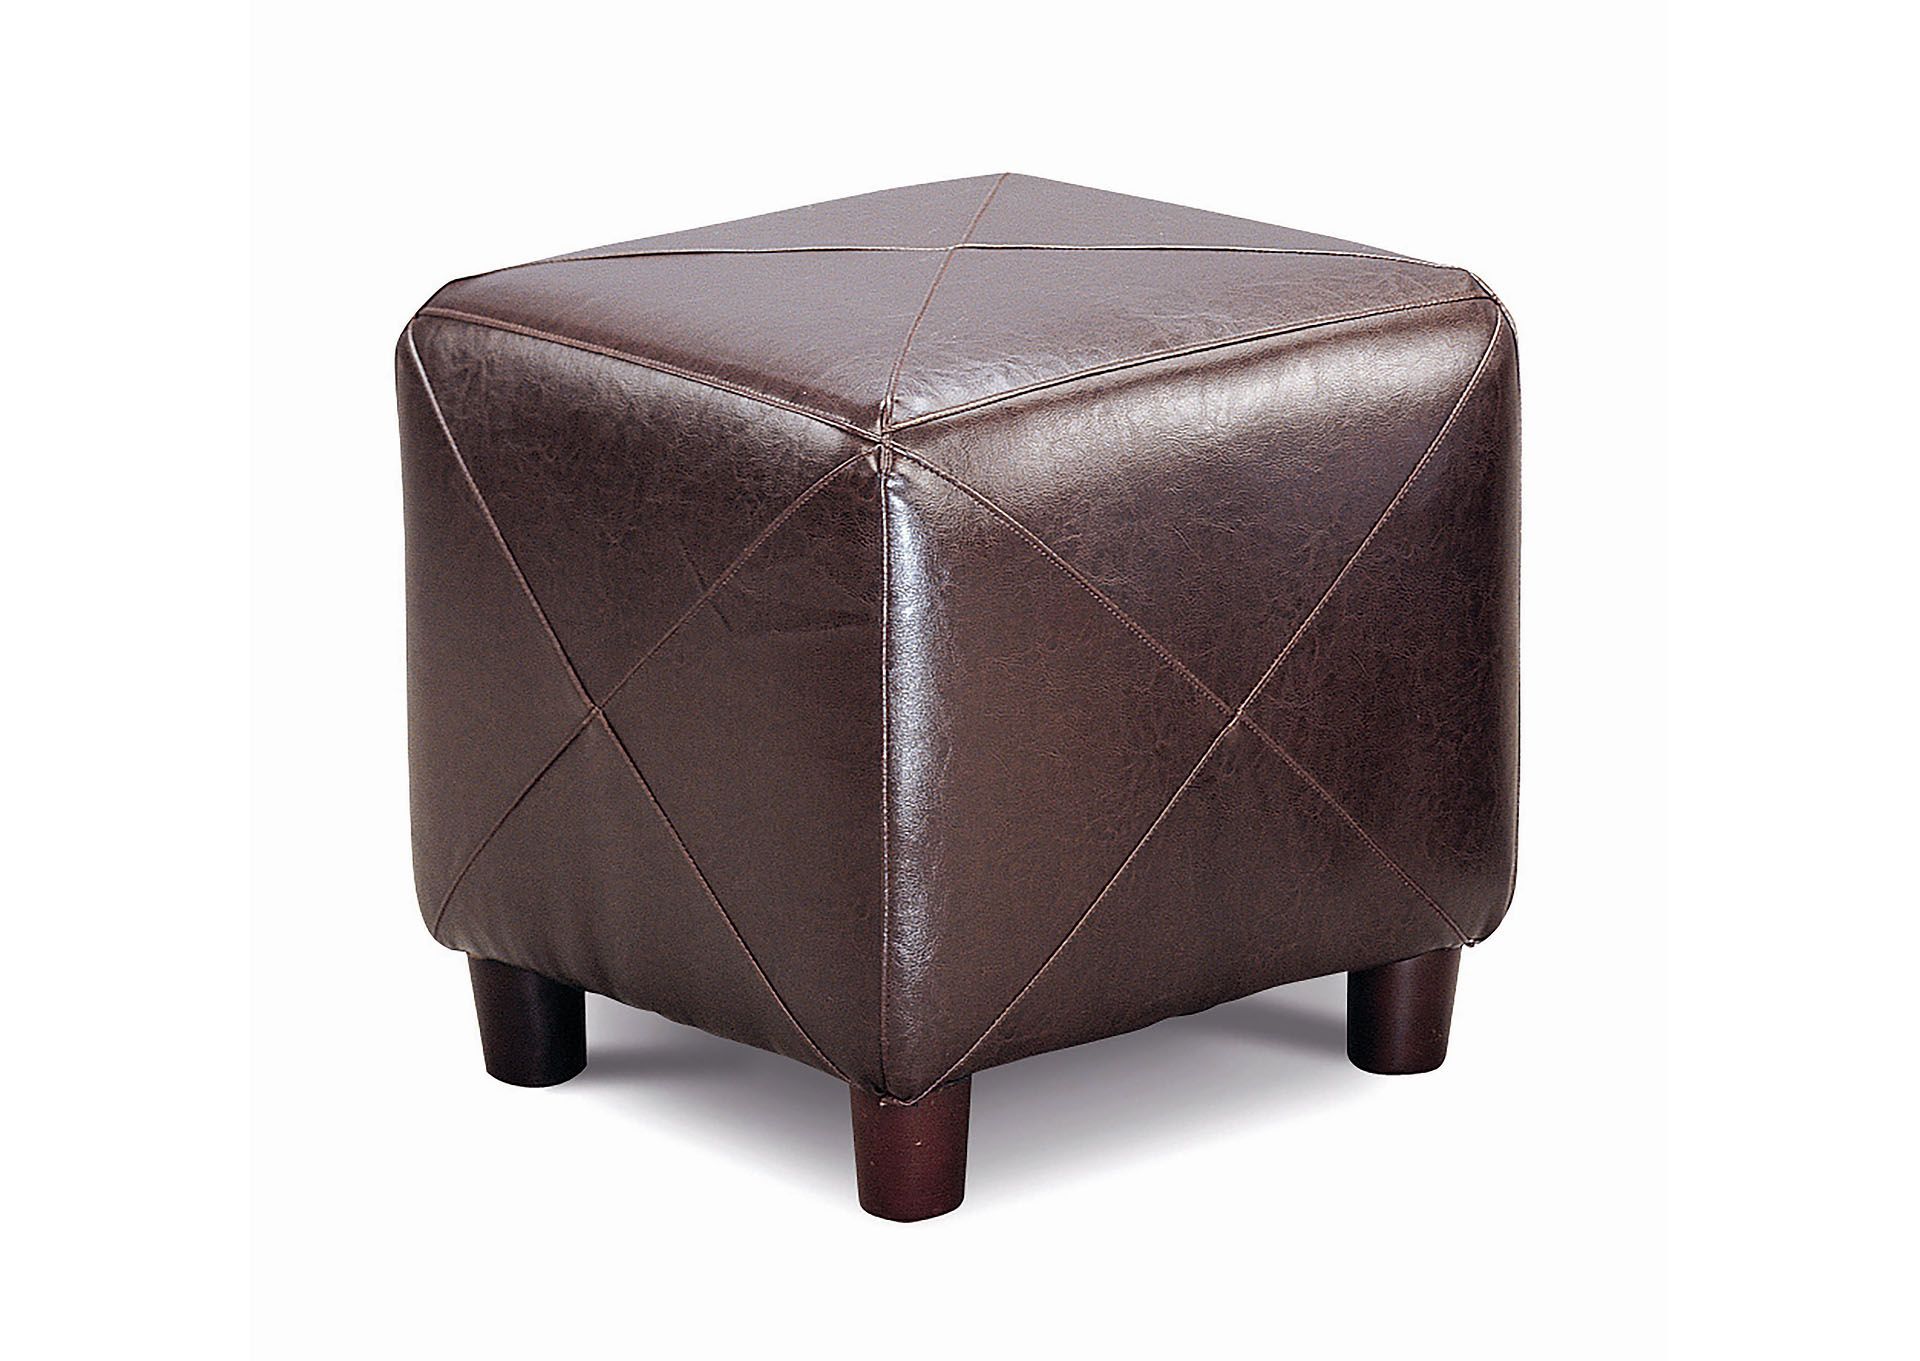 Woody Brown Cube Ottoman Brown Ramirez's Furniture For Gray And Cream Geometric Cuboid Pouf Ottomans (View 15 of 20)